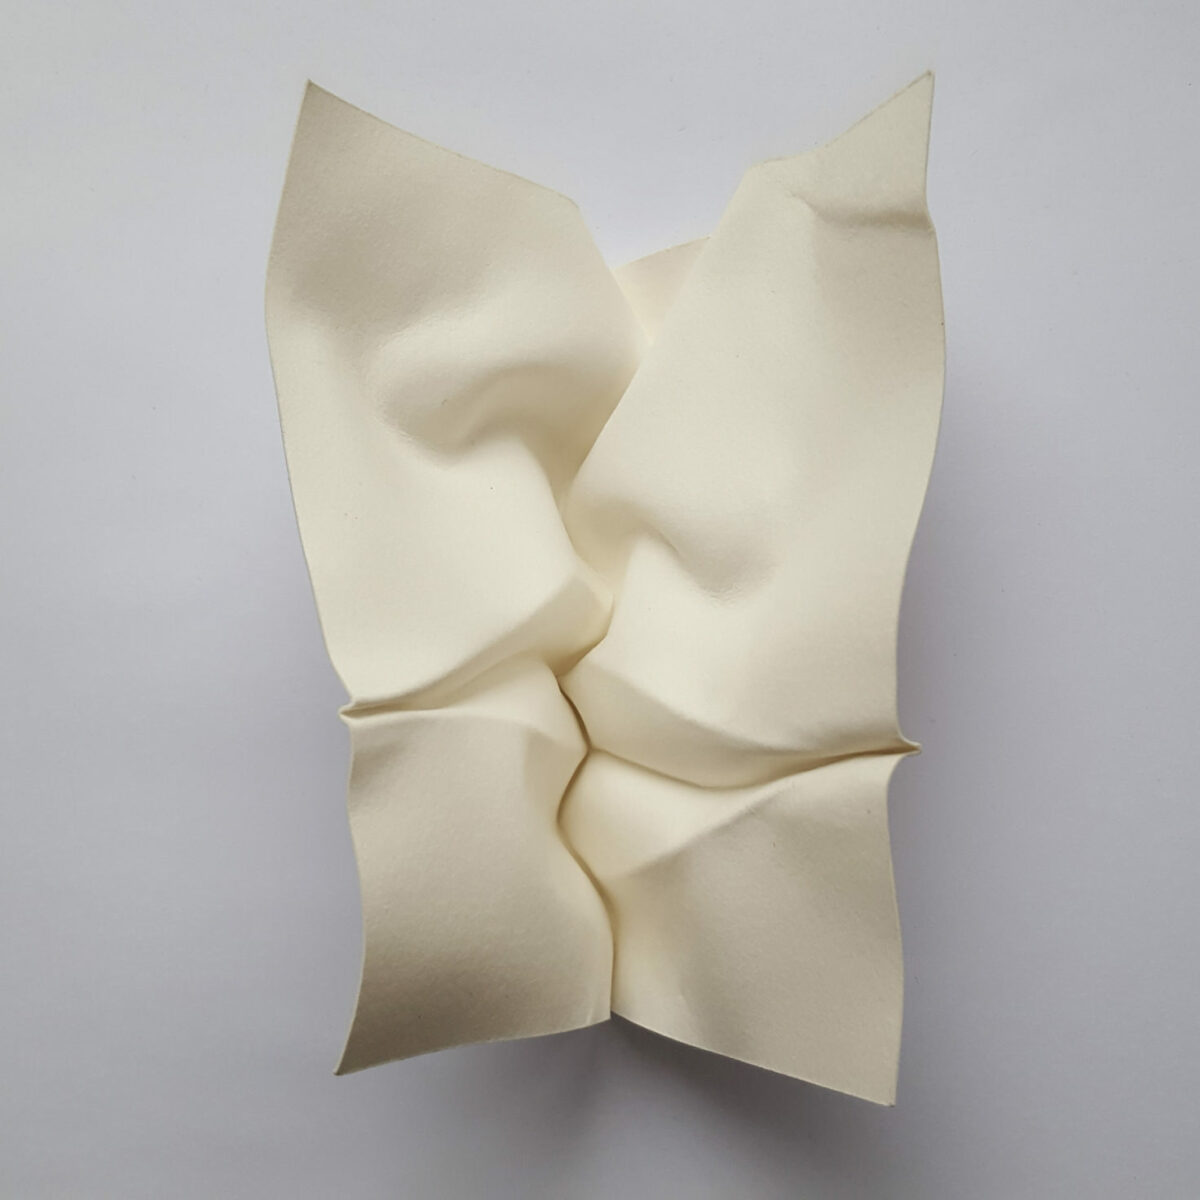 Fascinating Facial Sculptures Made From Folded Paper Sheets By Polly Verity (18)